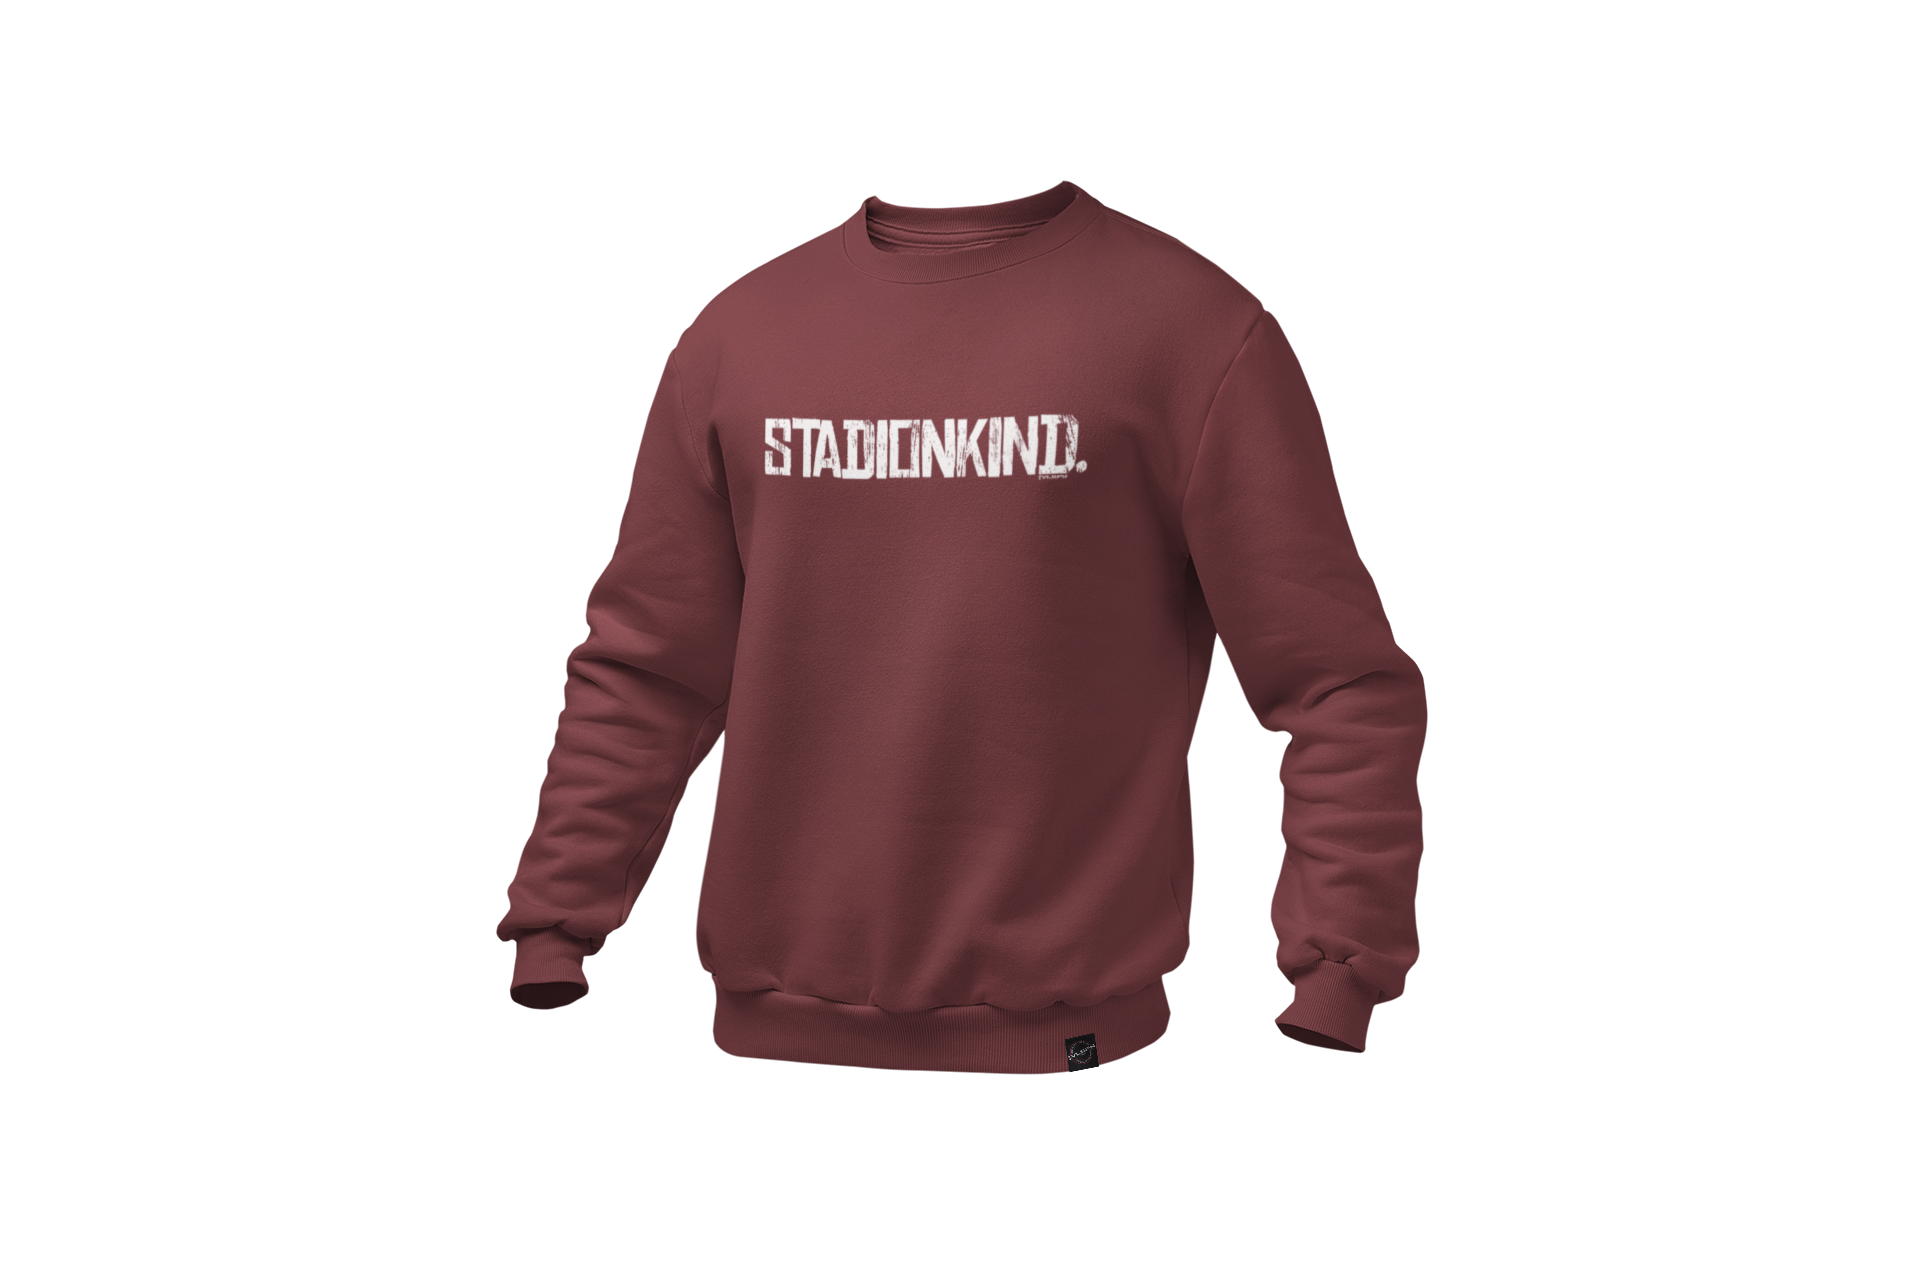 mockup-of-a-ghosted-crewneck-sweatshirt-over-a-solid-background-26960 (81).png